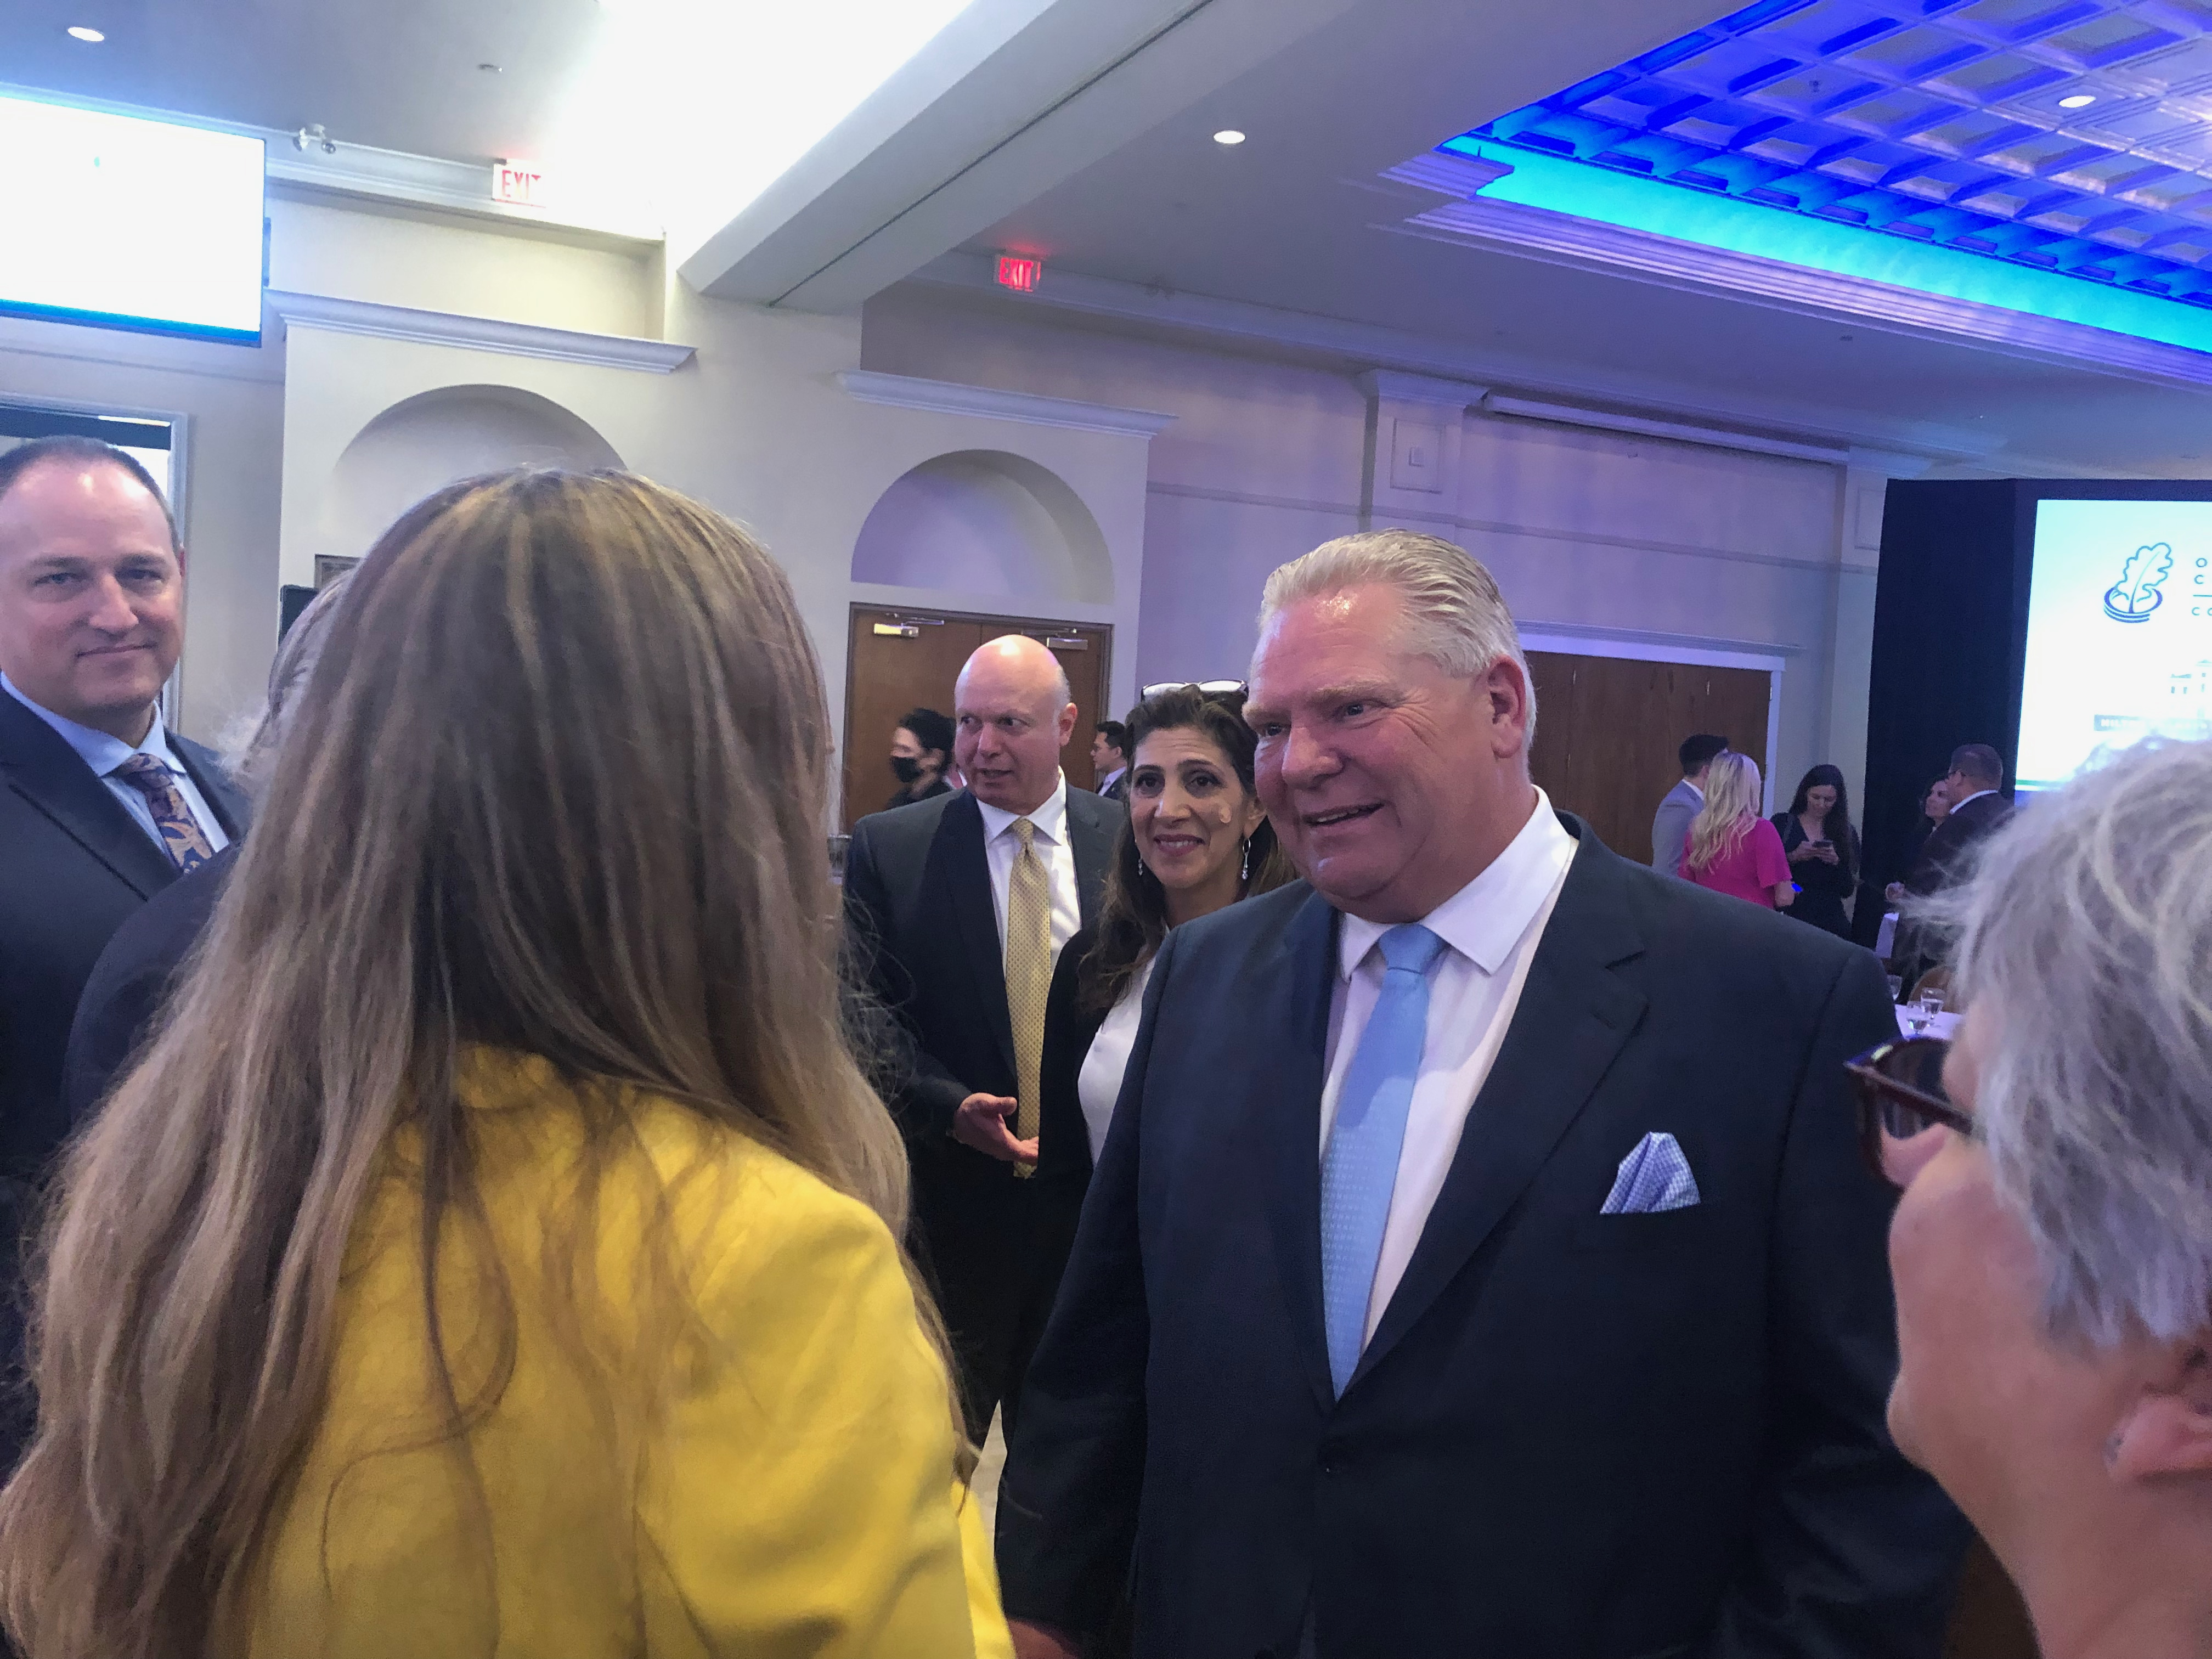 Premier Doug Ford | Doug Ford engages with a constituent at a Chamber of Commerce event | Oakville News